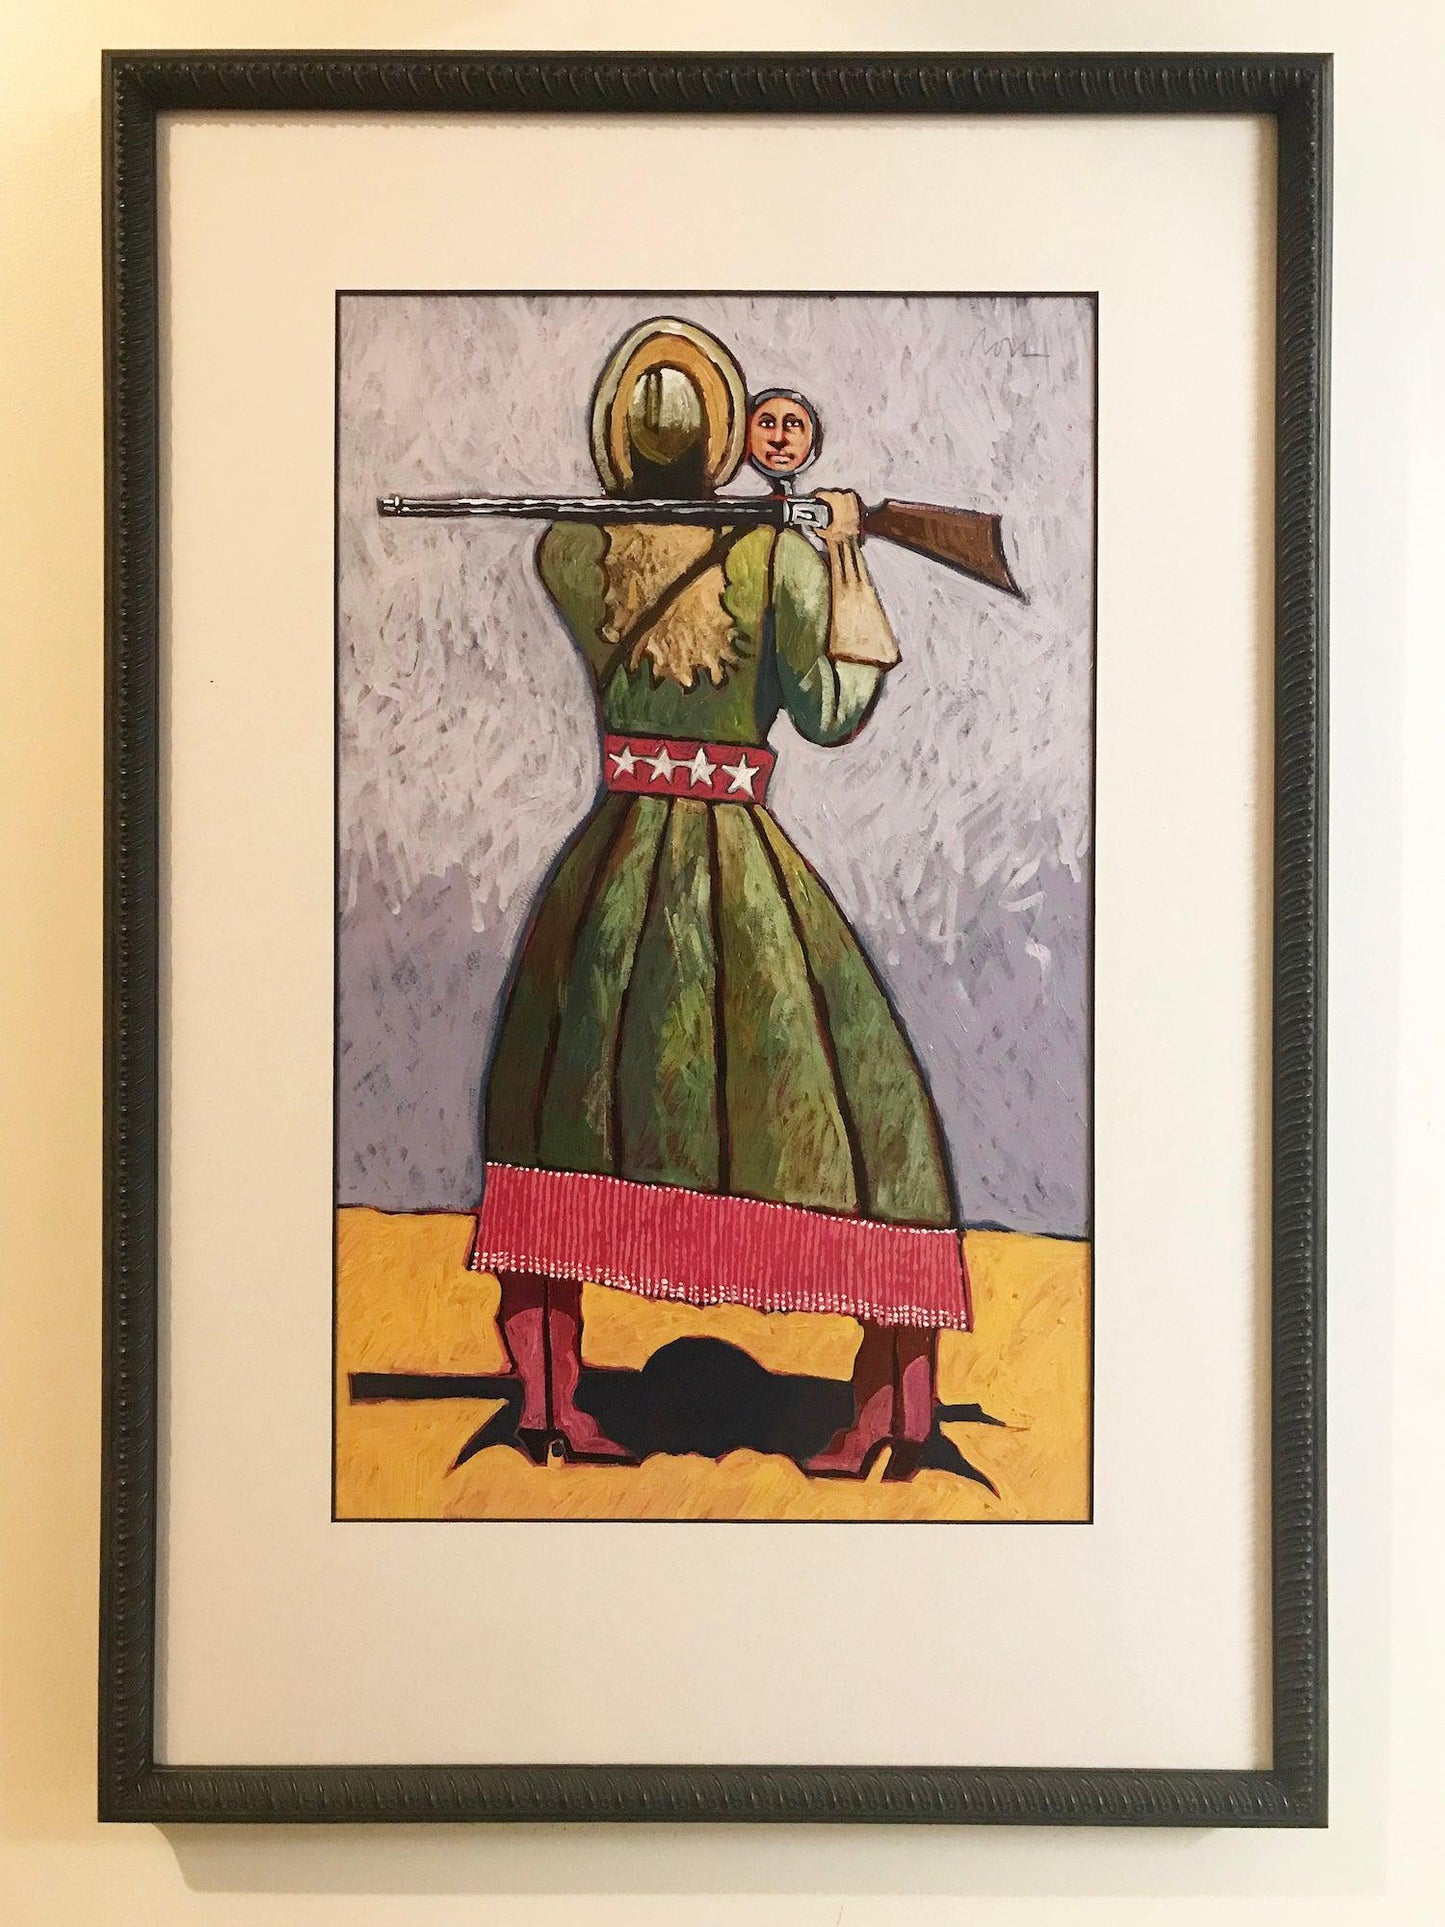 Annie Oakley-Painting-Thom Ross-Sorrel Sky Gallery